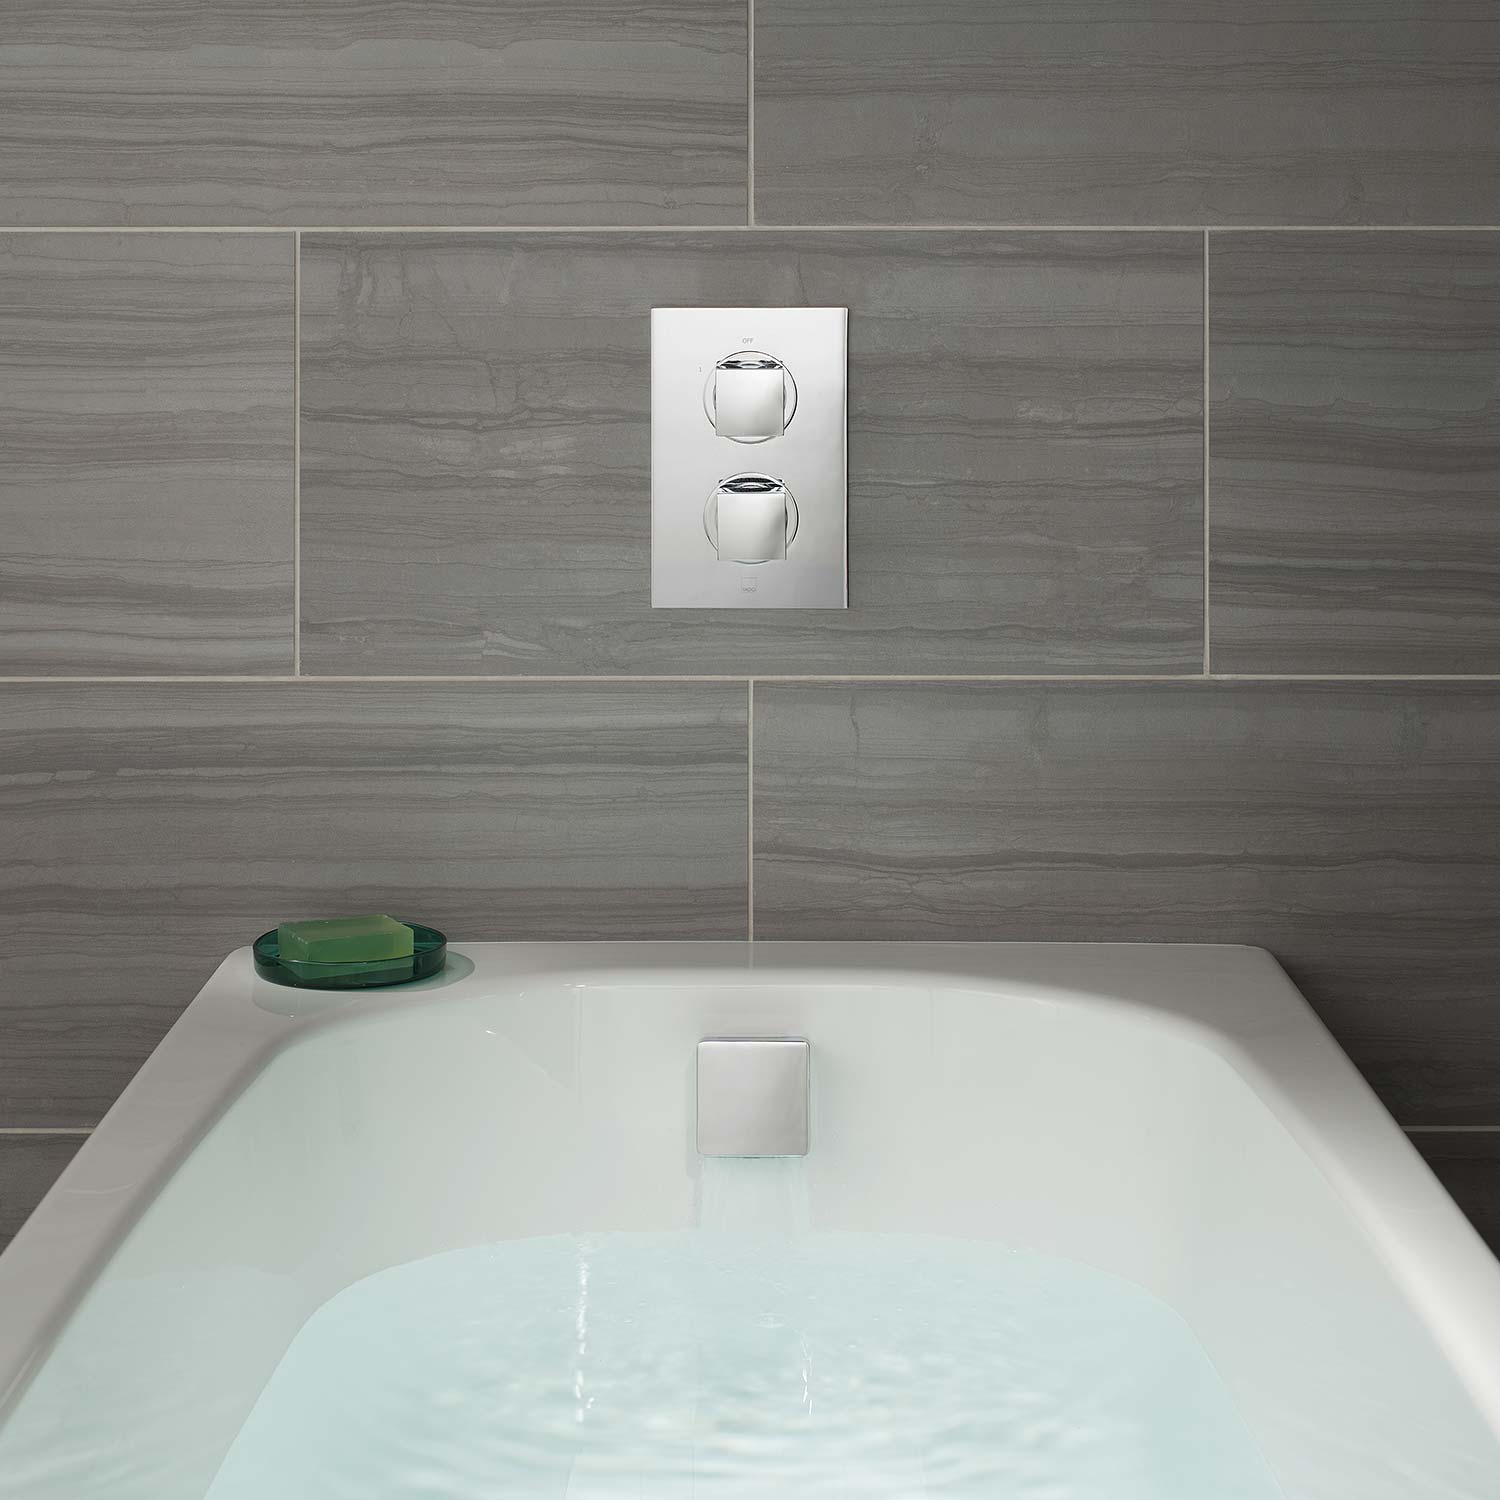 A bath full of water with a rectangular thermostatic valve and square bath filler waste overflow.